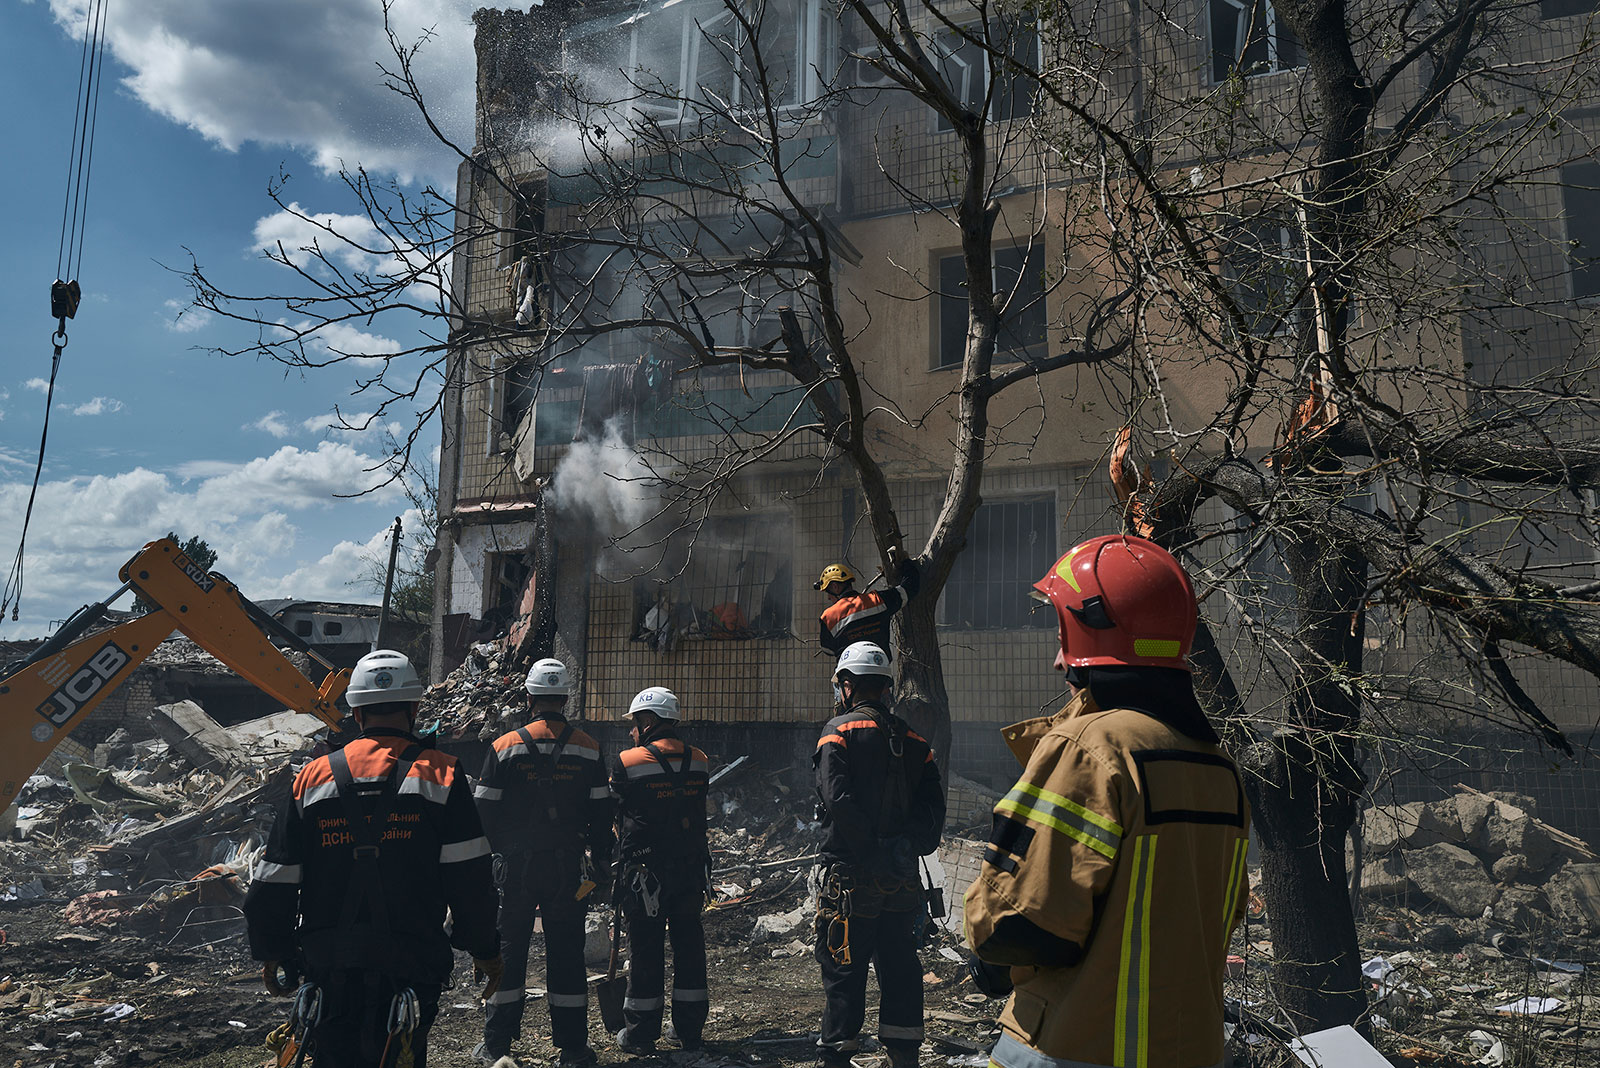 Emergency personnel work at the scene after a missile hit an apartment building in Kryvyi Rih, Ukraine, on Monday, July 31.